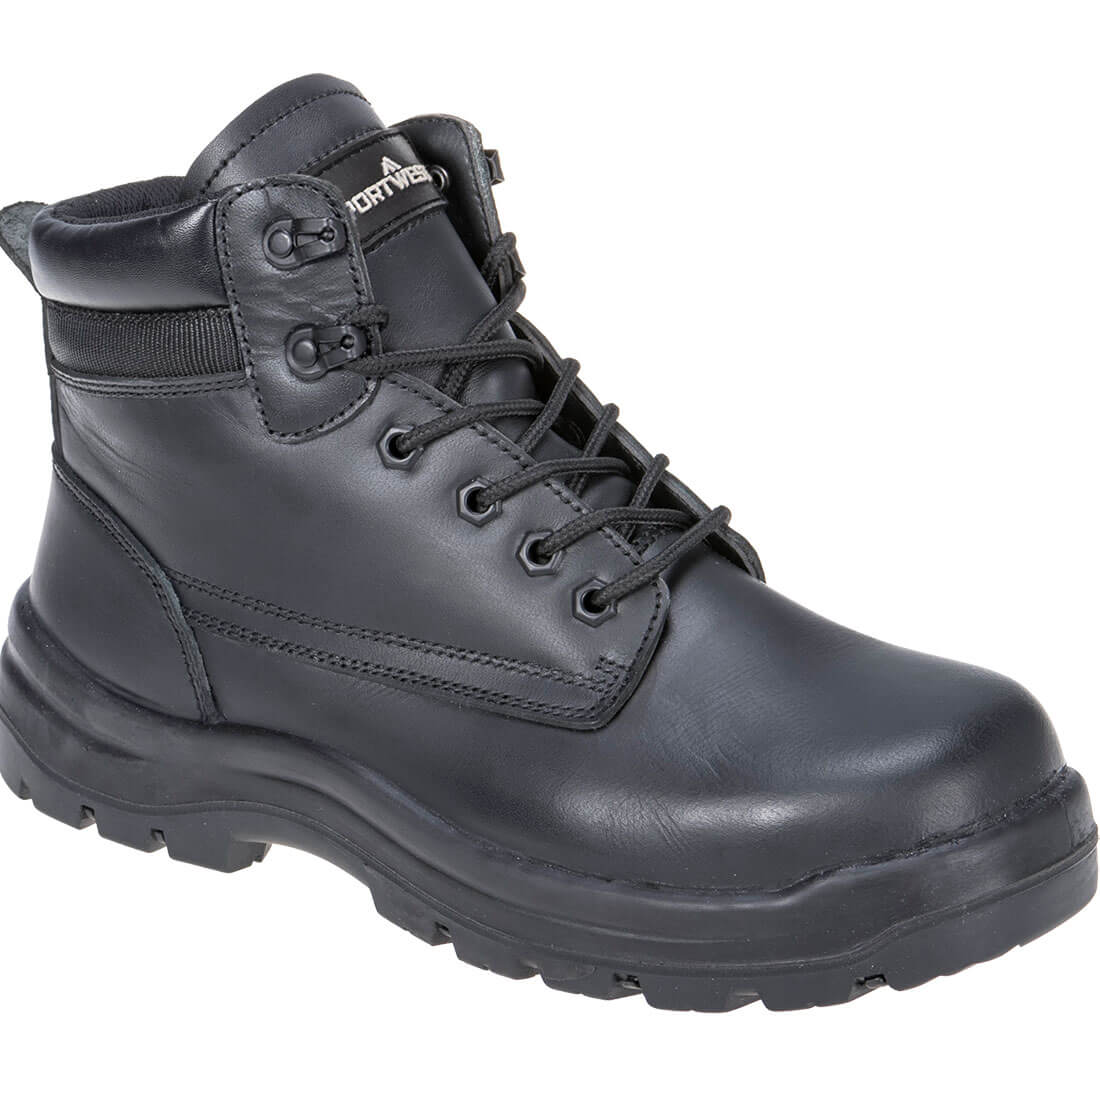 Foyle Safety Boot S3 HRO CI HI FO Boots FD11